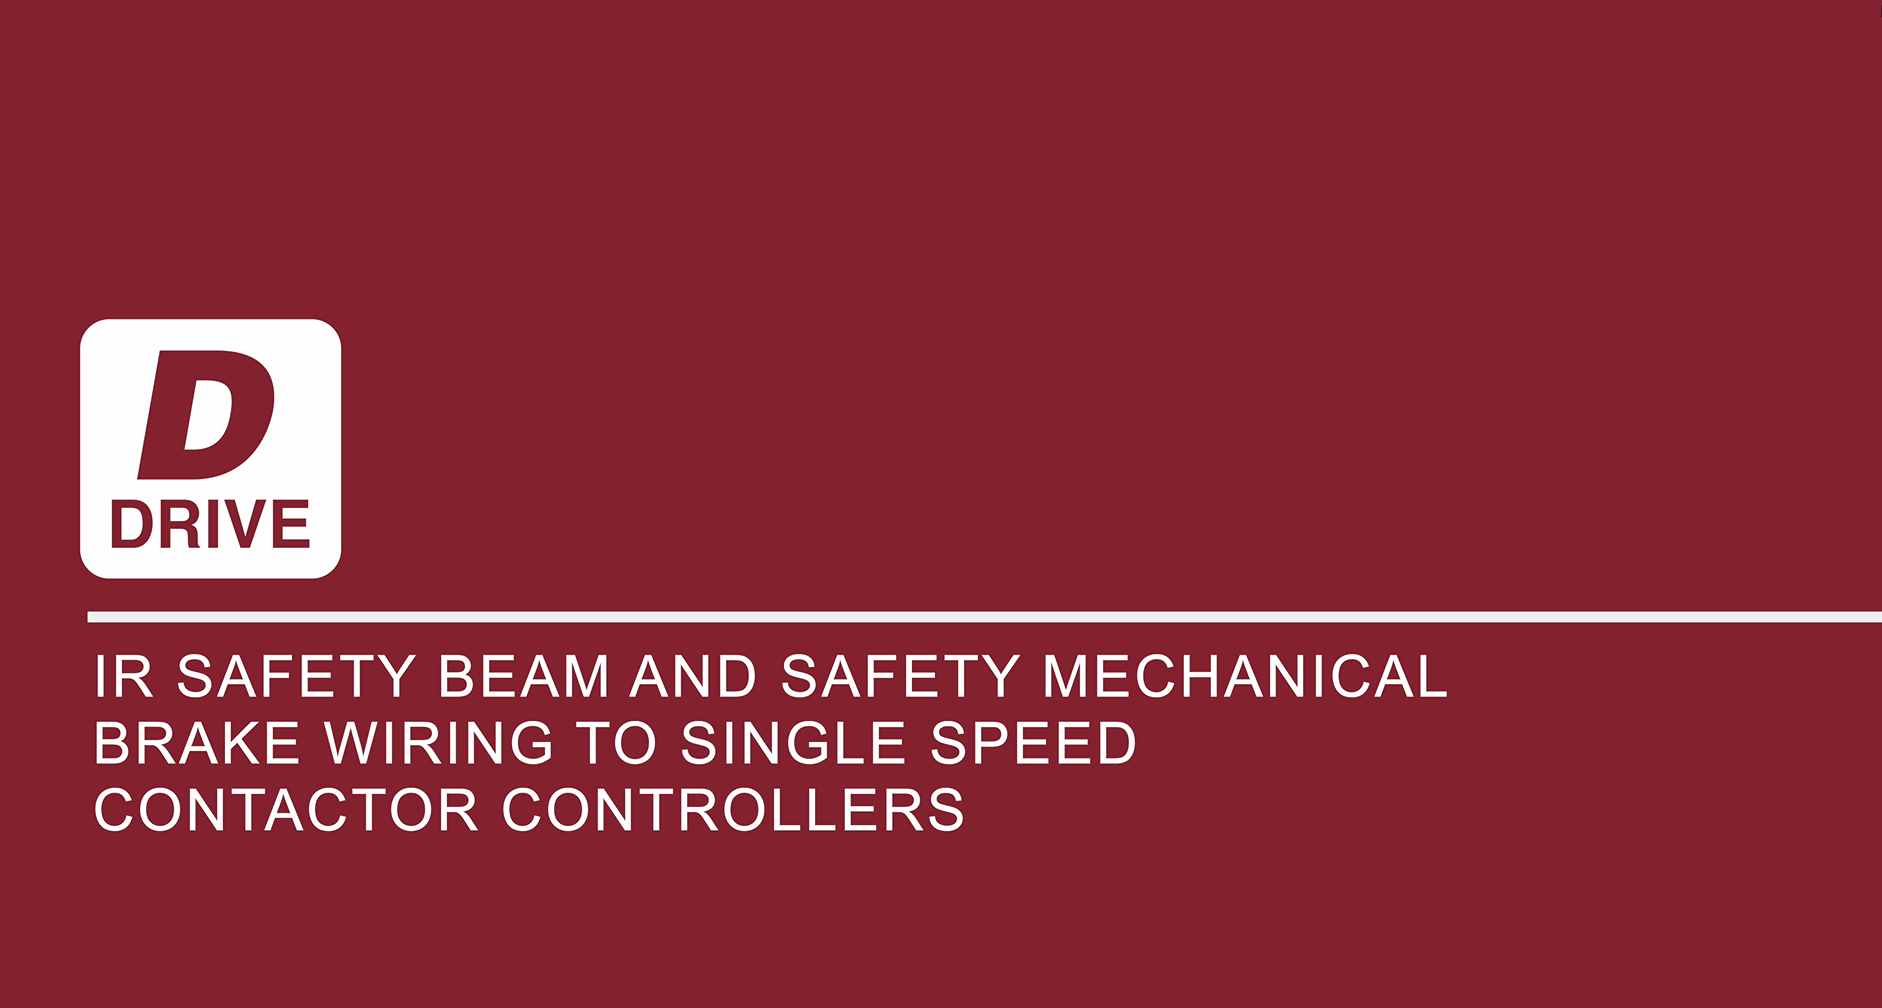 IR Safety beam and safety mechanical brake wiring to single speed contactor controllers